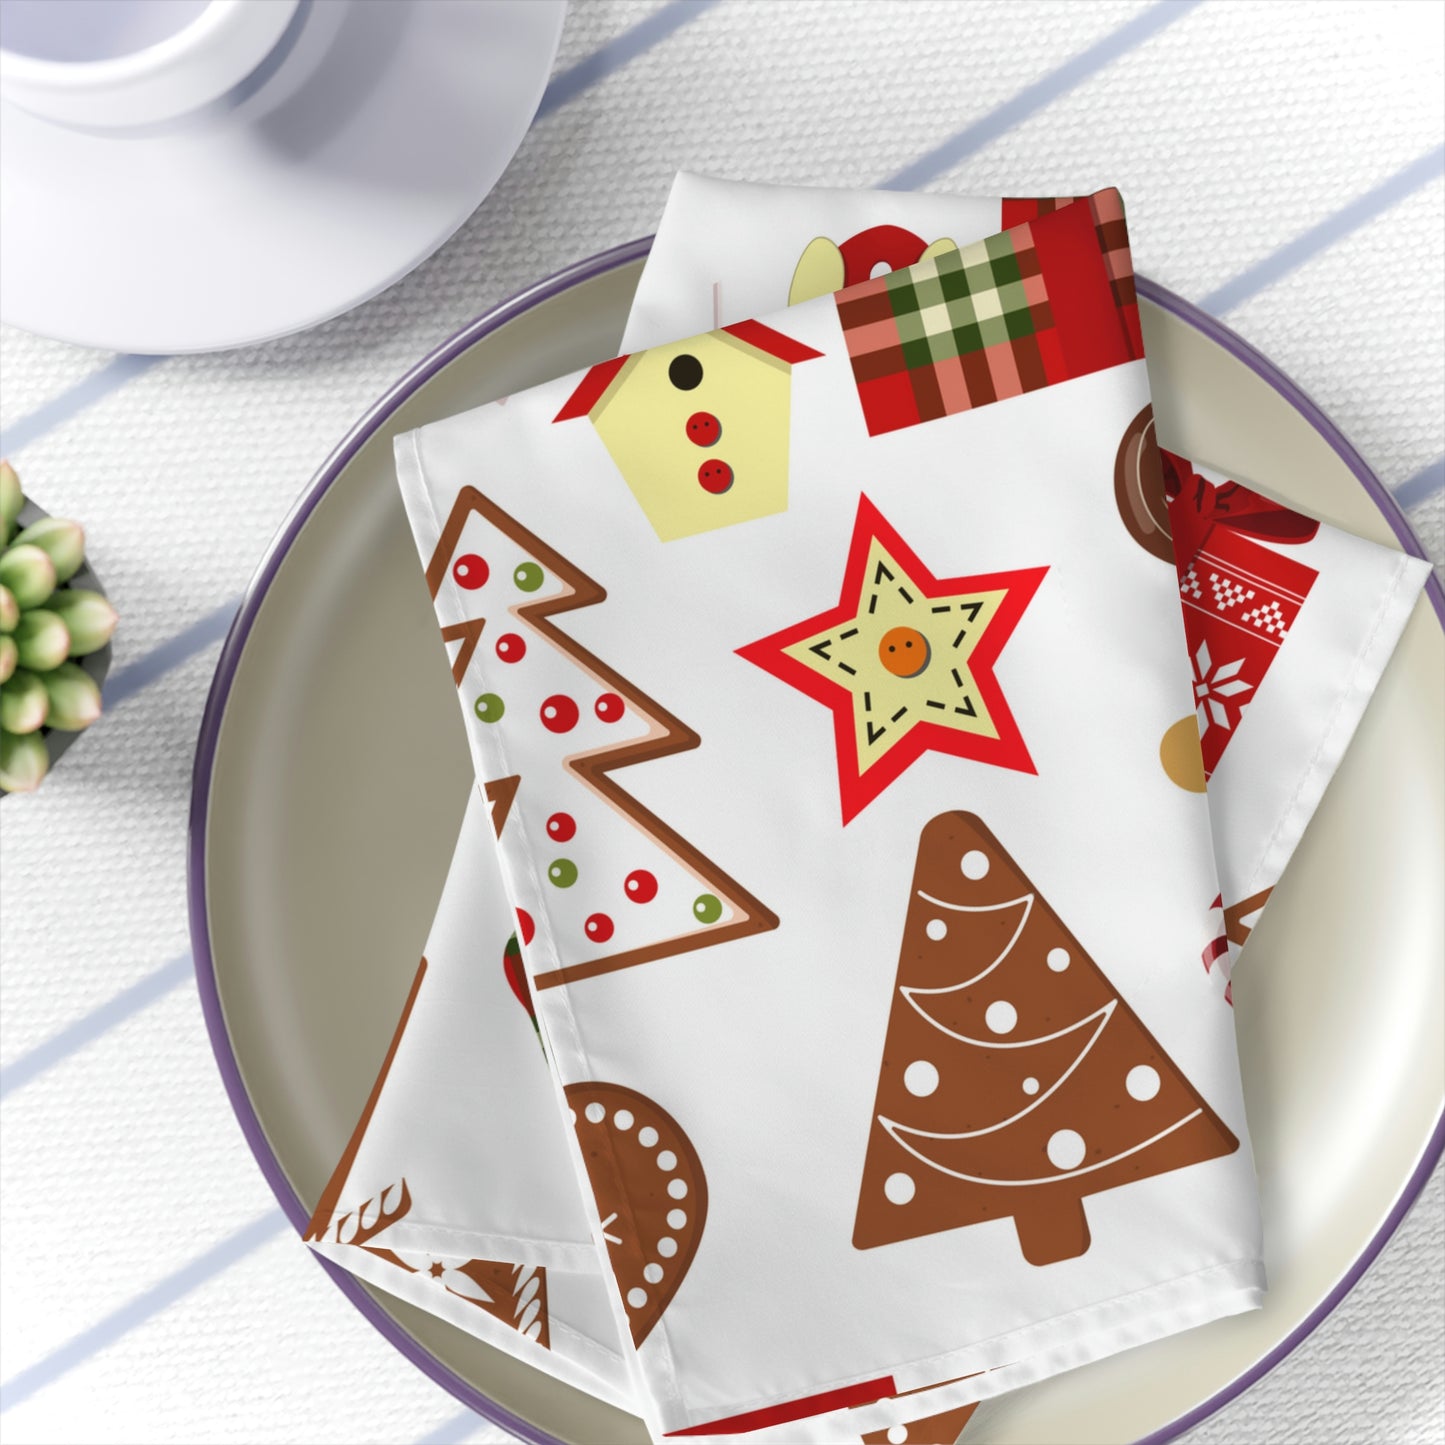 Merry Christmas Tree Wreath and Rocking Horse Napkins Set of 4